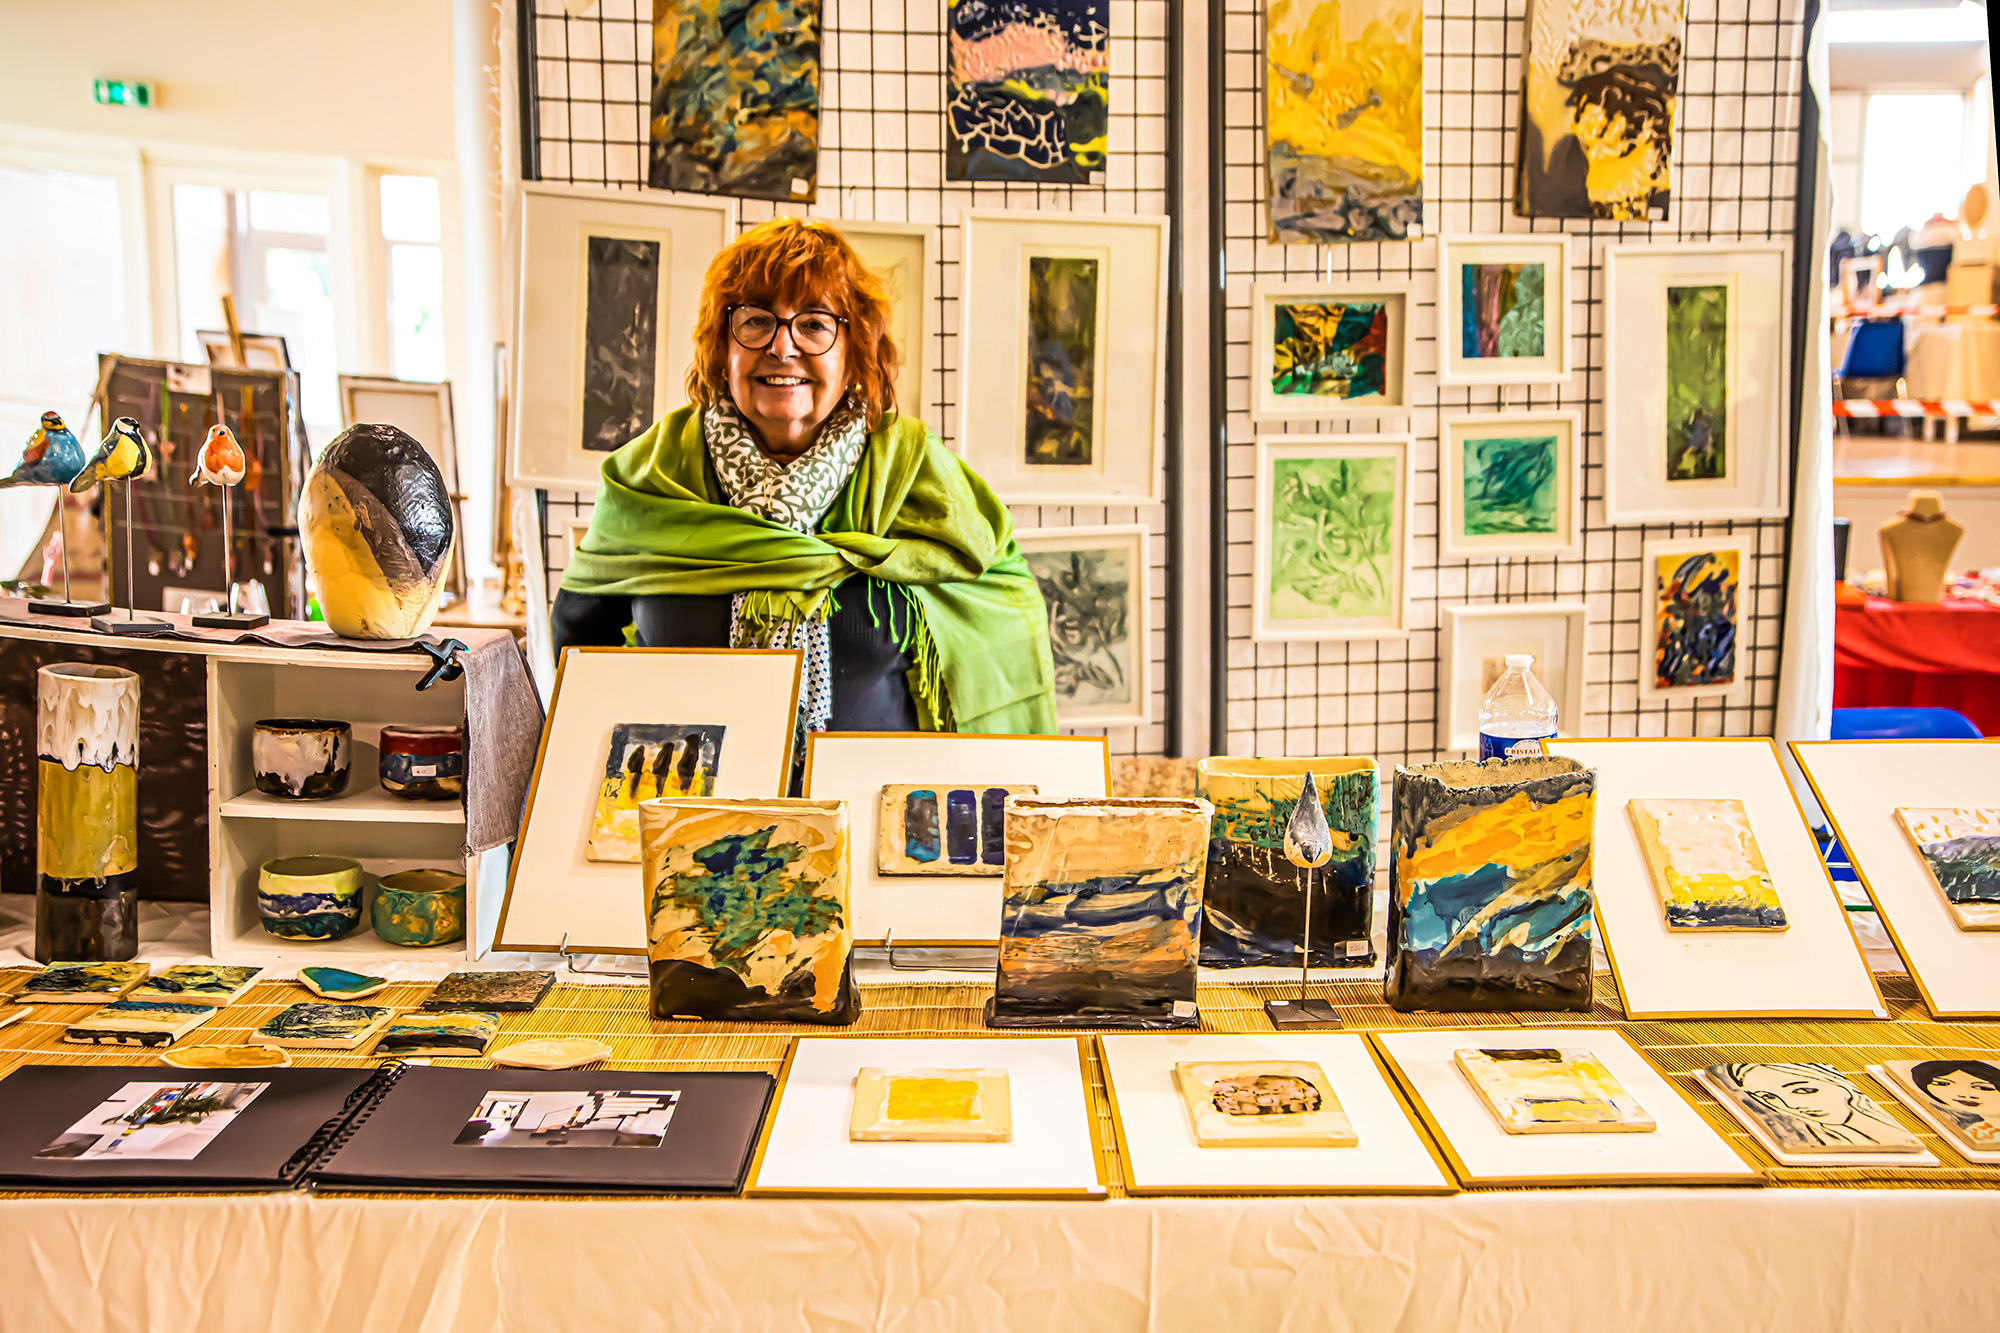 6 Stand d'Odile Marchalot 1bis 201122.jpg